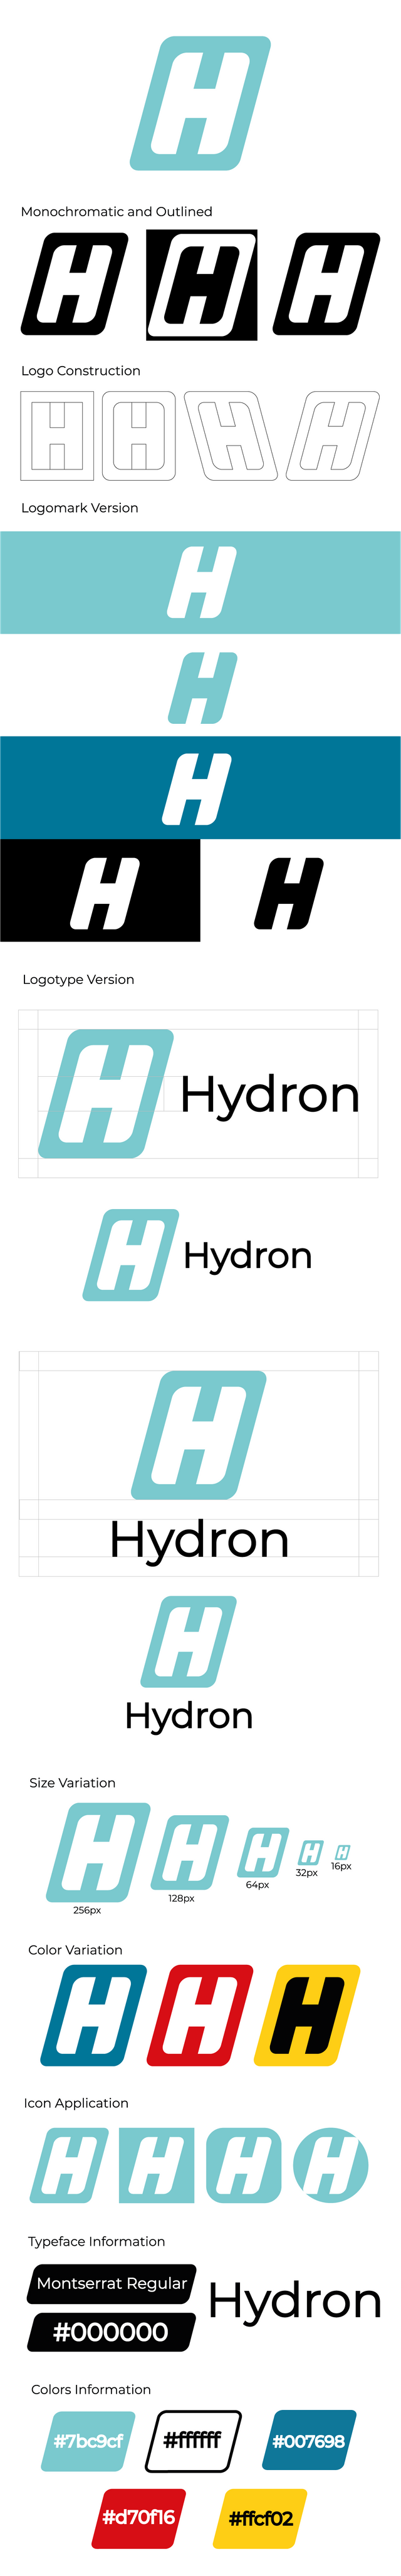 Hydron 6.png